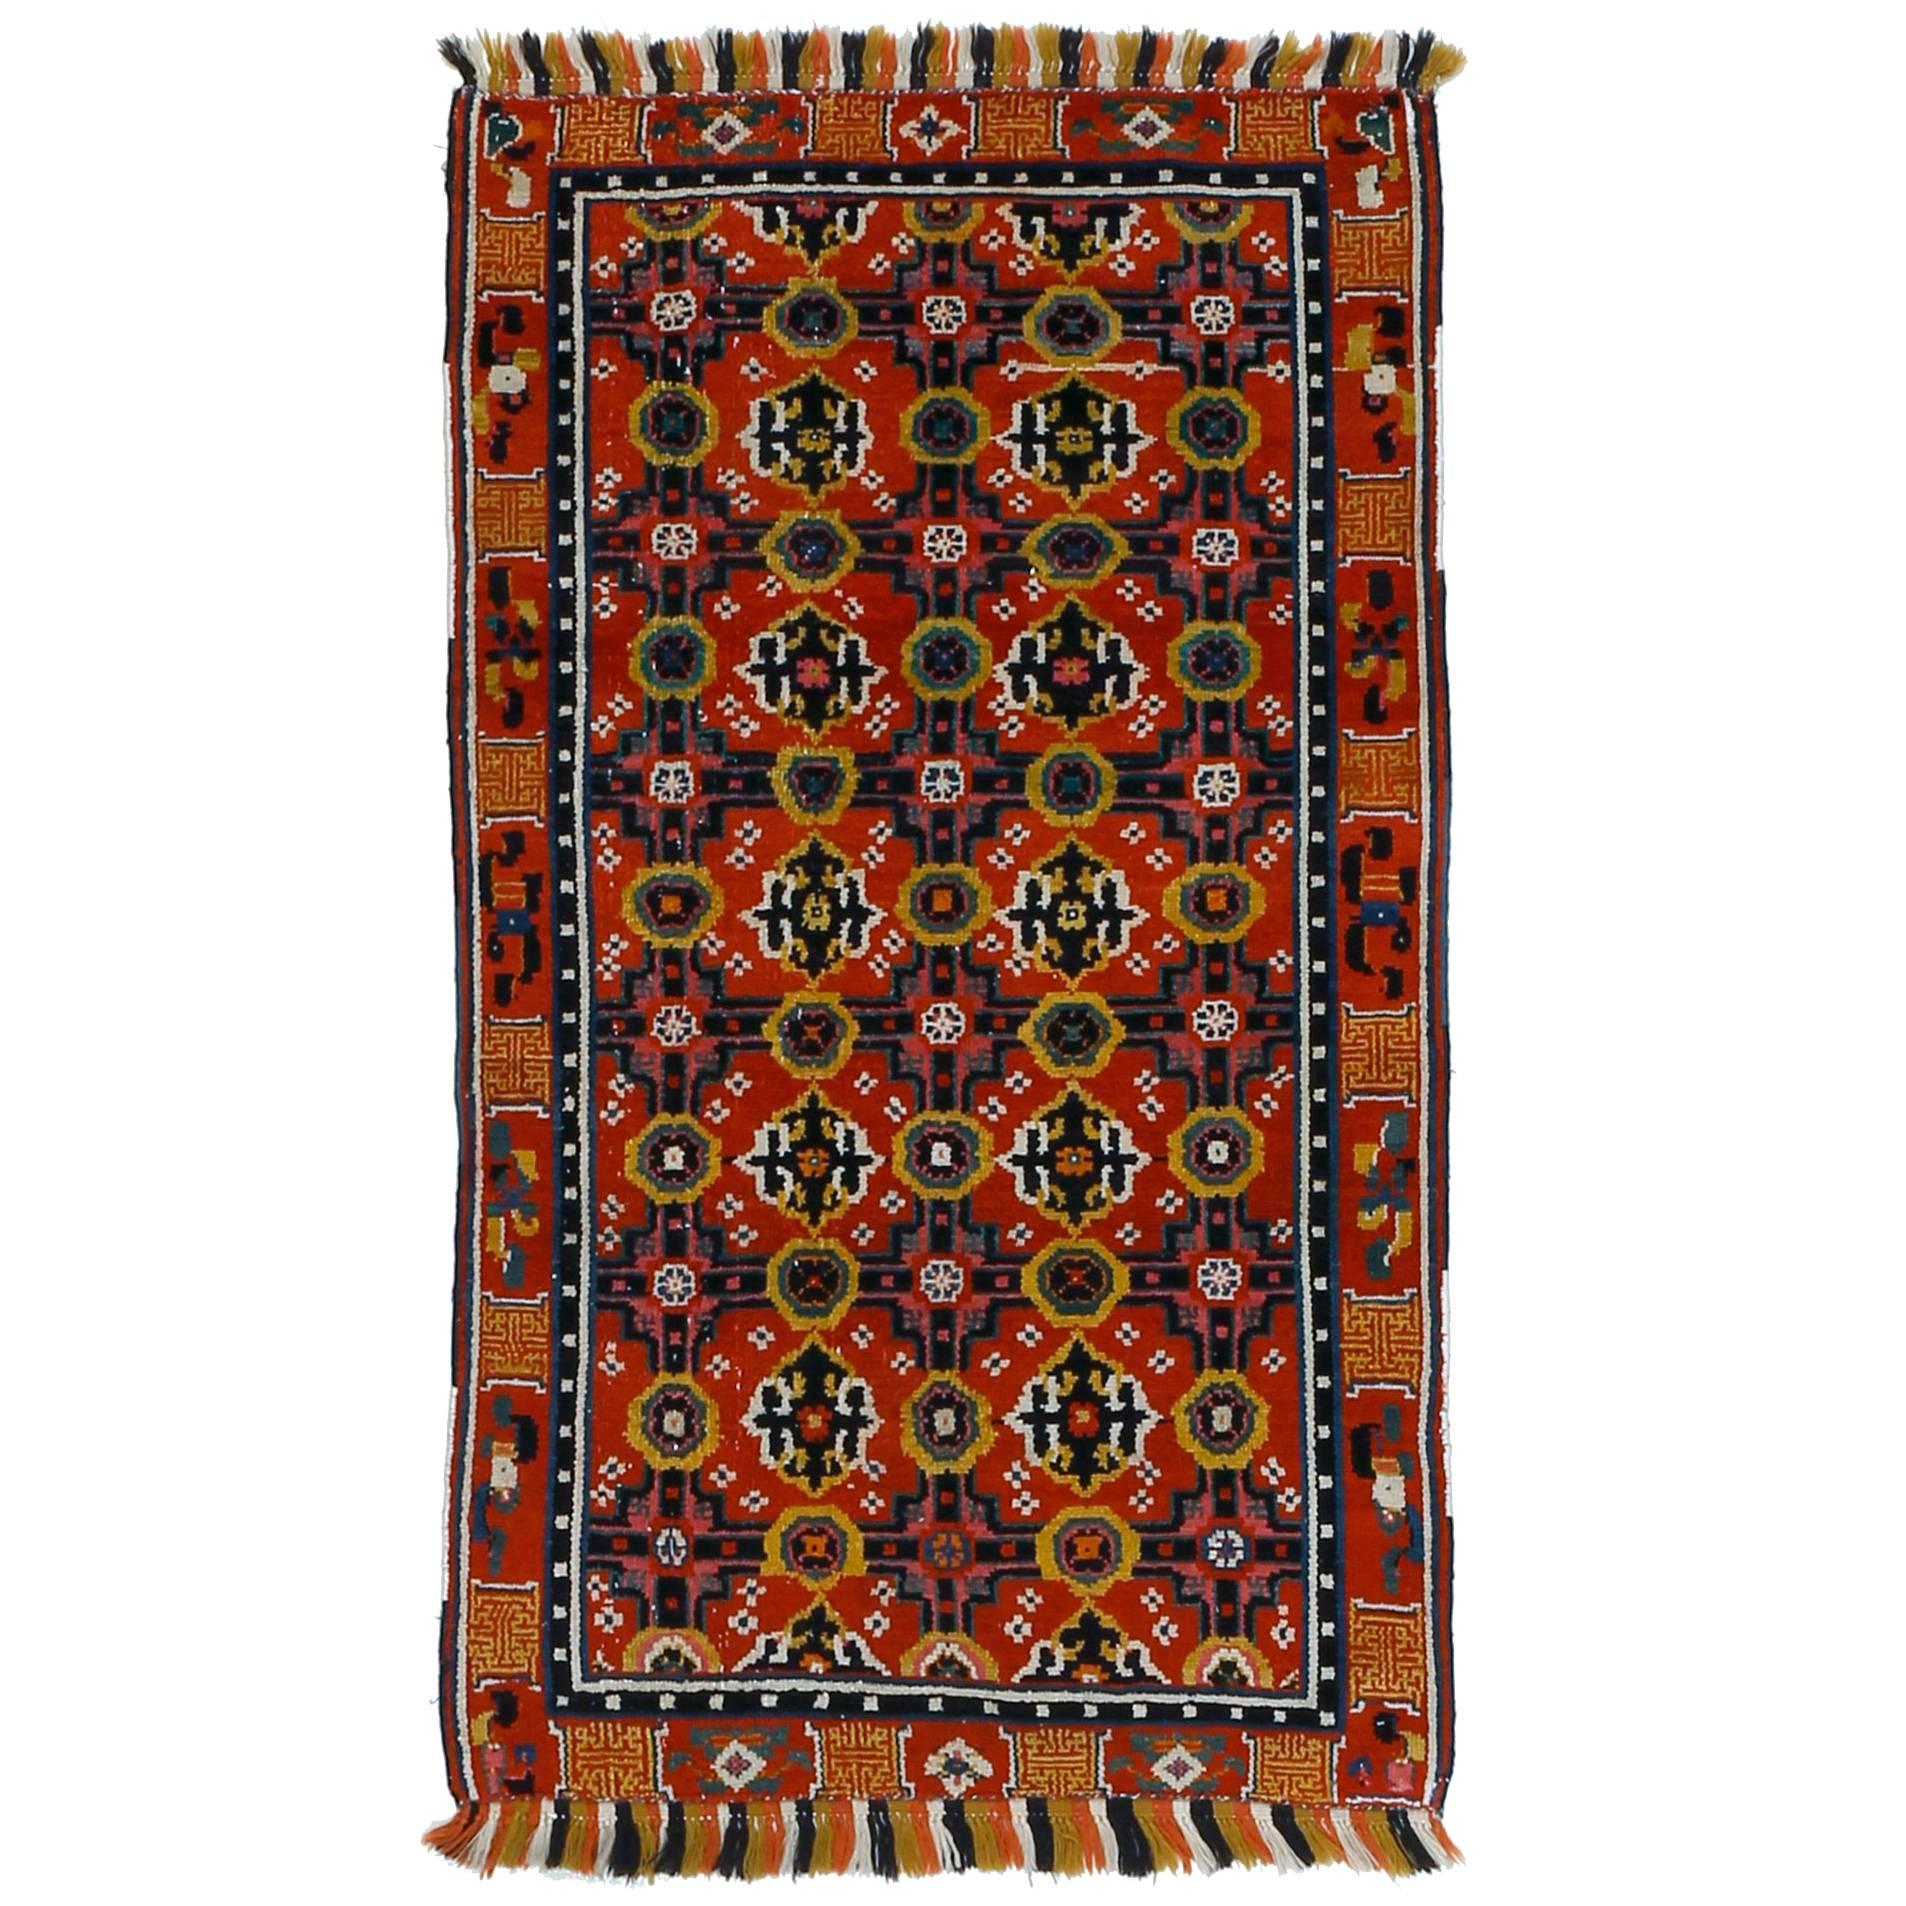 Antique Chinese Rug with Brocade Pattern